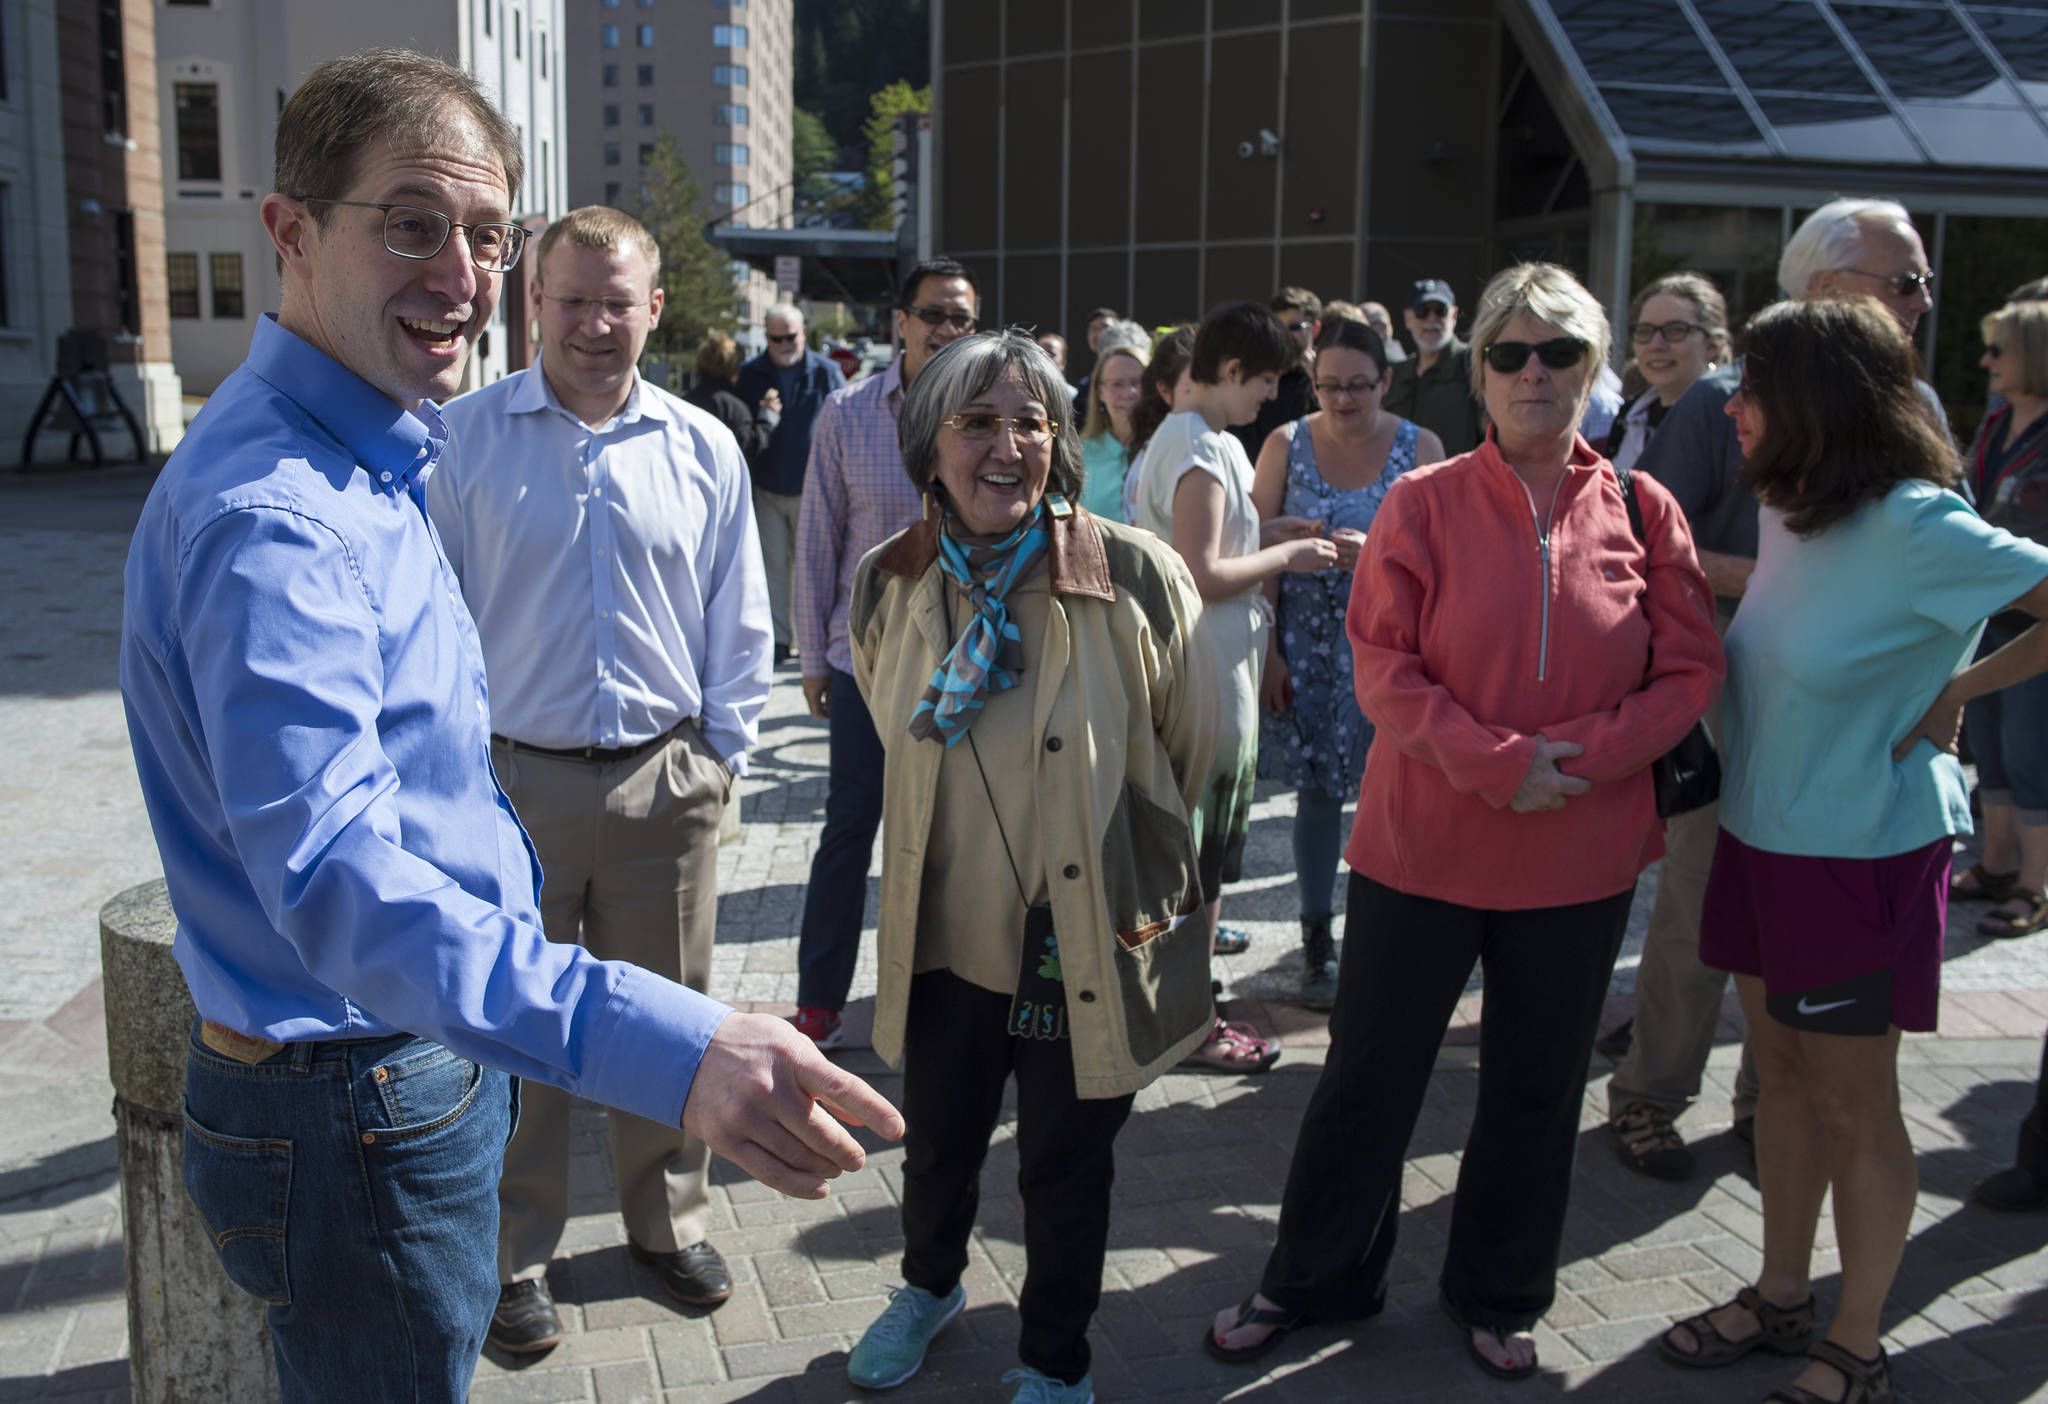 Jesse Kiehl, left, meets with supporters before his announcement to run for the Senate District Q seat in front of the Alaska State Capitol on Thursday, May 17, 2018. The seat is currently held by Sen. Dennis Egan who is not running for reelection. (Michael Penn | Juneau Empire)